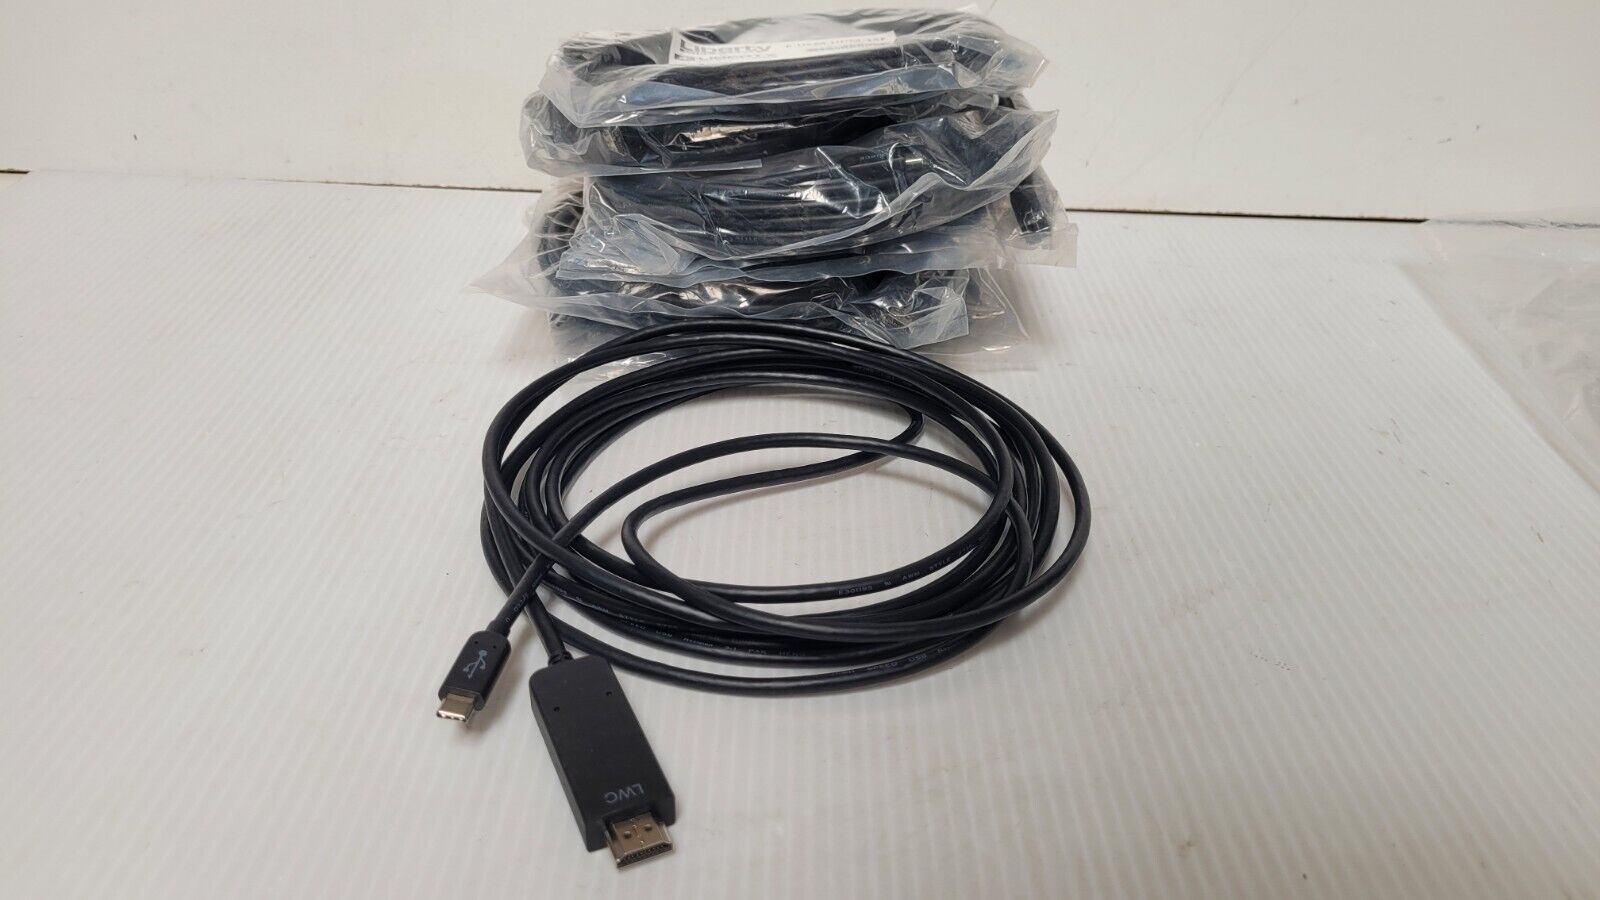 Lot of 9 15' Molded USB C Male to HDMI A Male Cable - Liberty AV E-UCM-HDM-15F